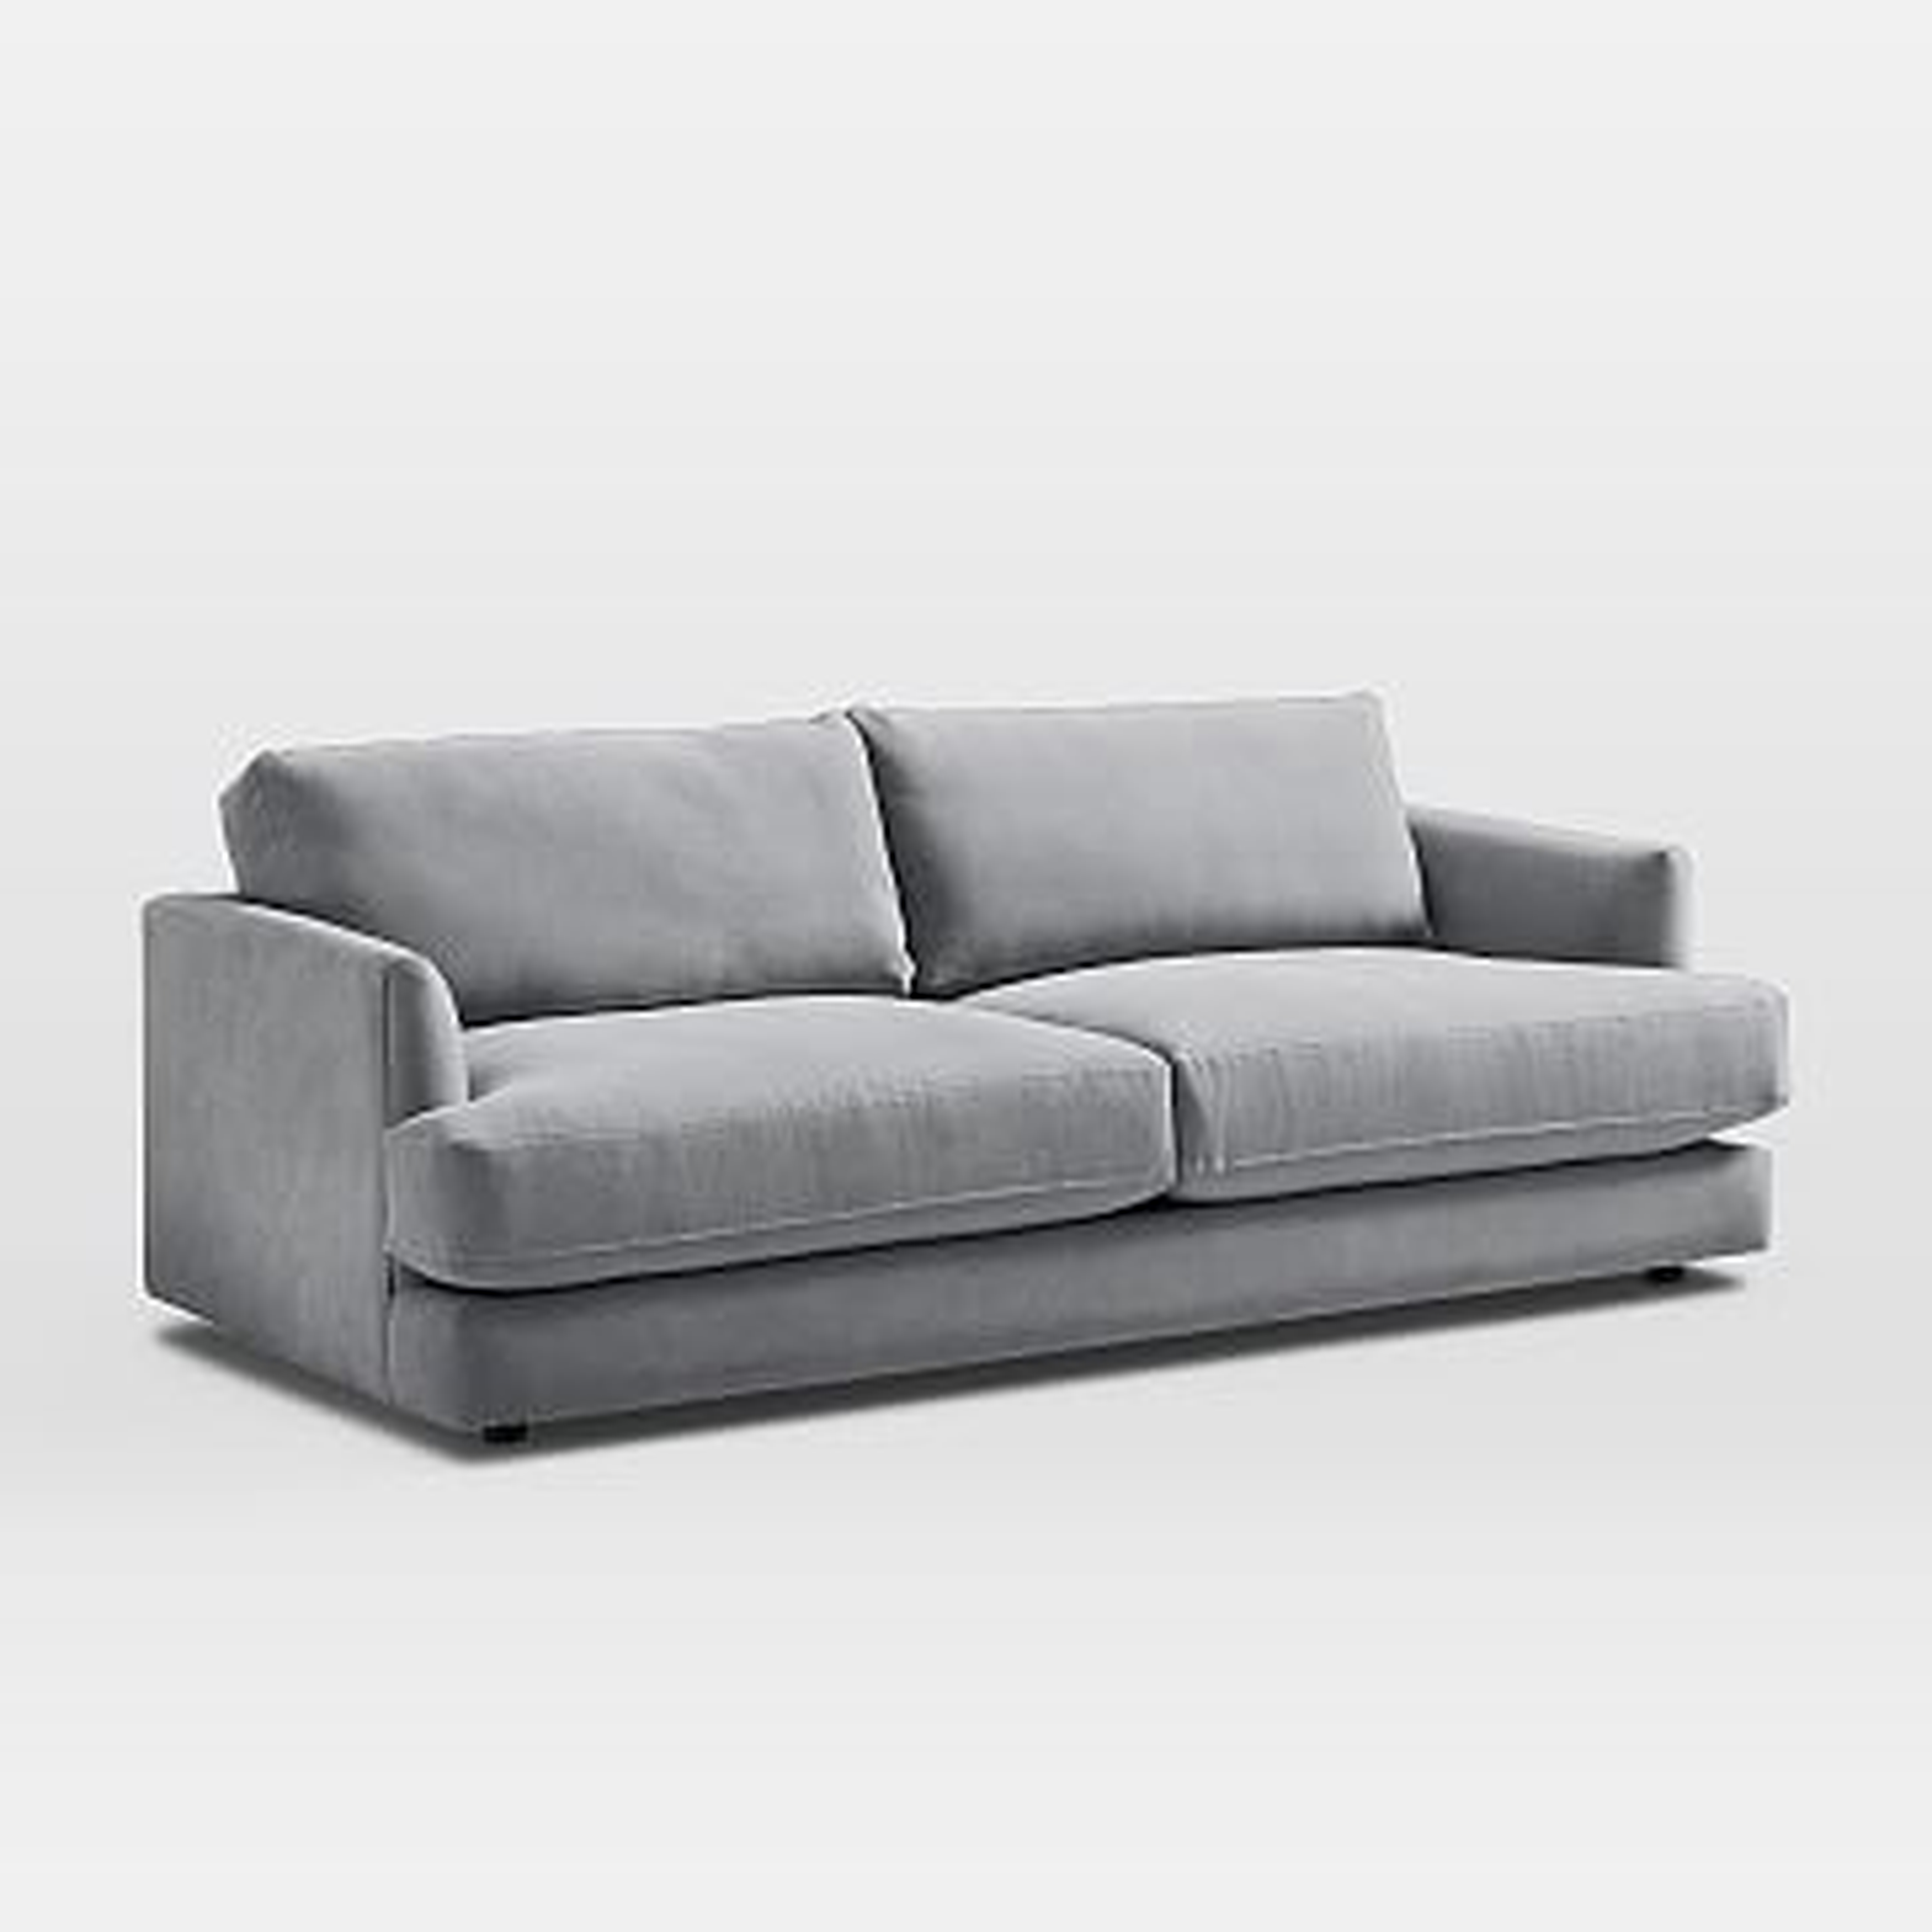 Haven 84" Multi-Seat Sofa, Standard Depth, Performance Washed Canvas, Storm Gray - West Elm